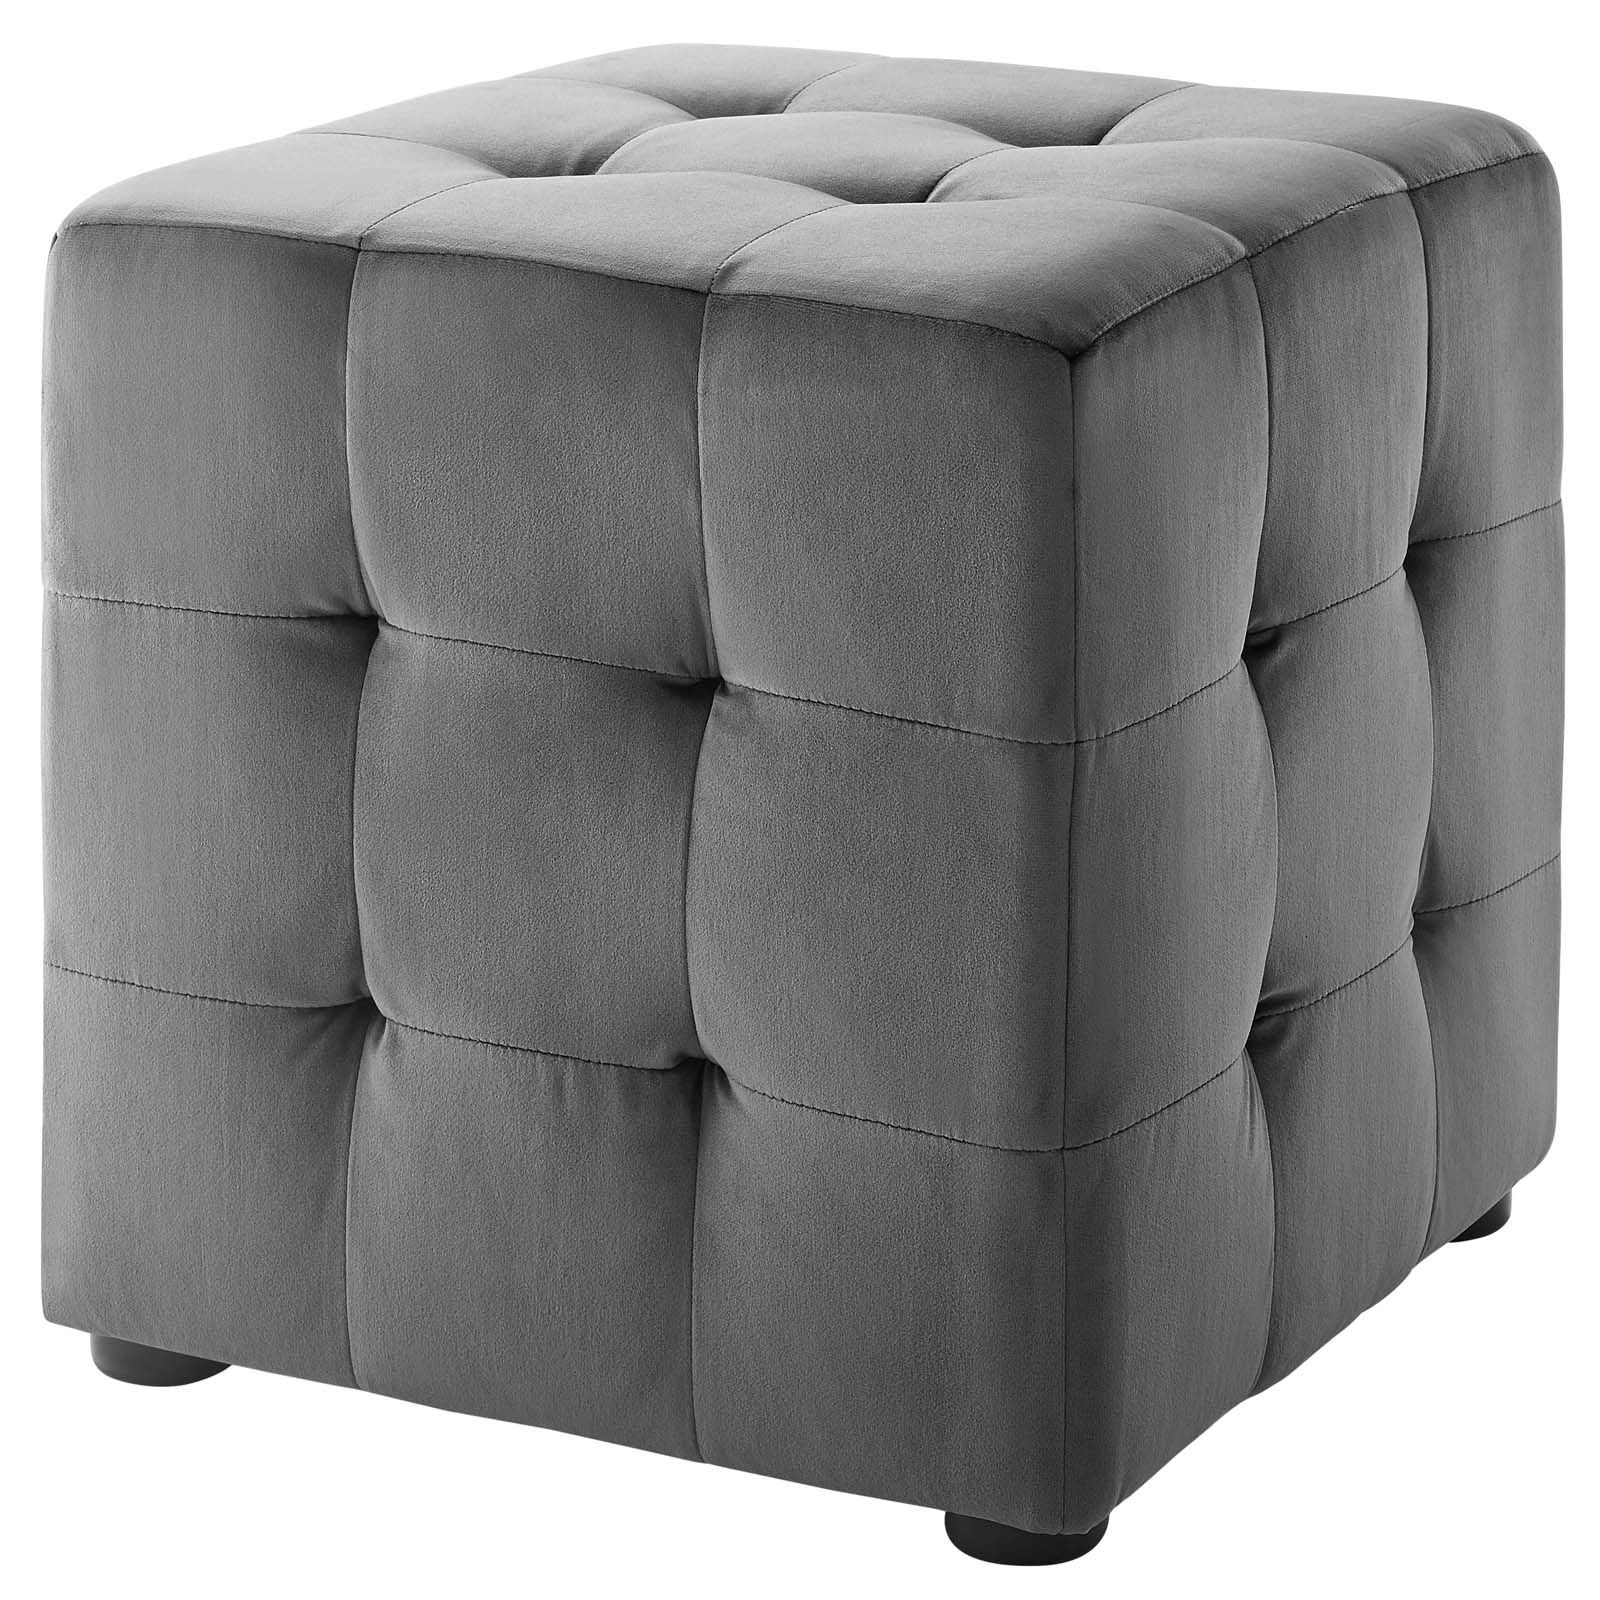 Light Blue Cylinder Pouf Ottomans With Regard To Most Current Contour Tufted Cube Performance Velvet Ottoman Light Blue (View 7 of 10)